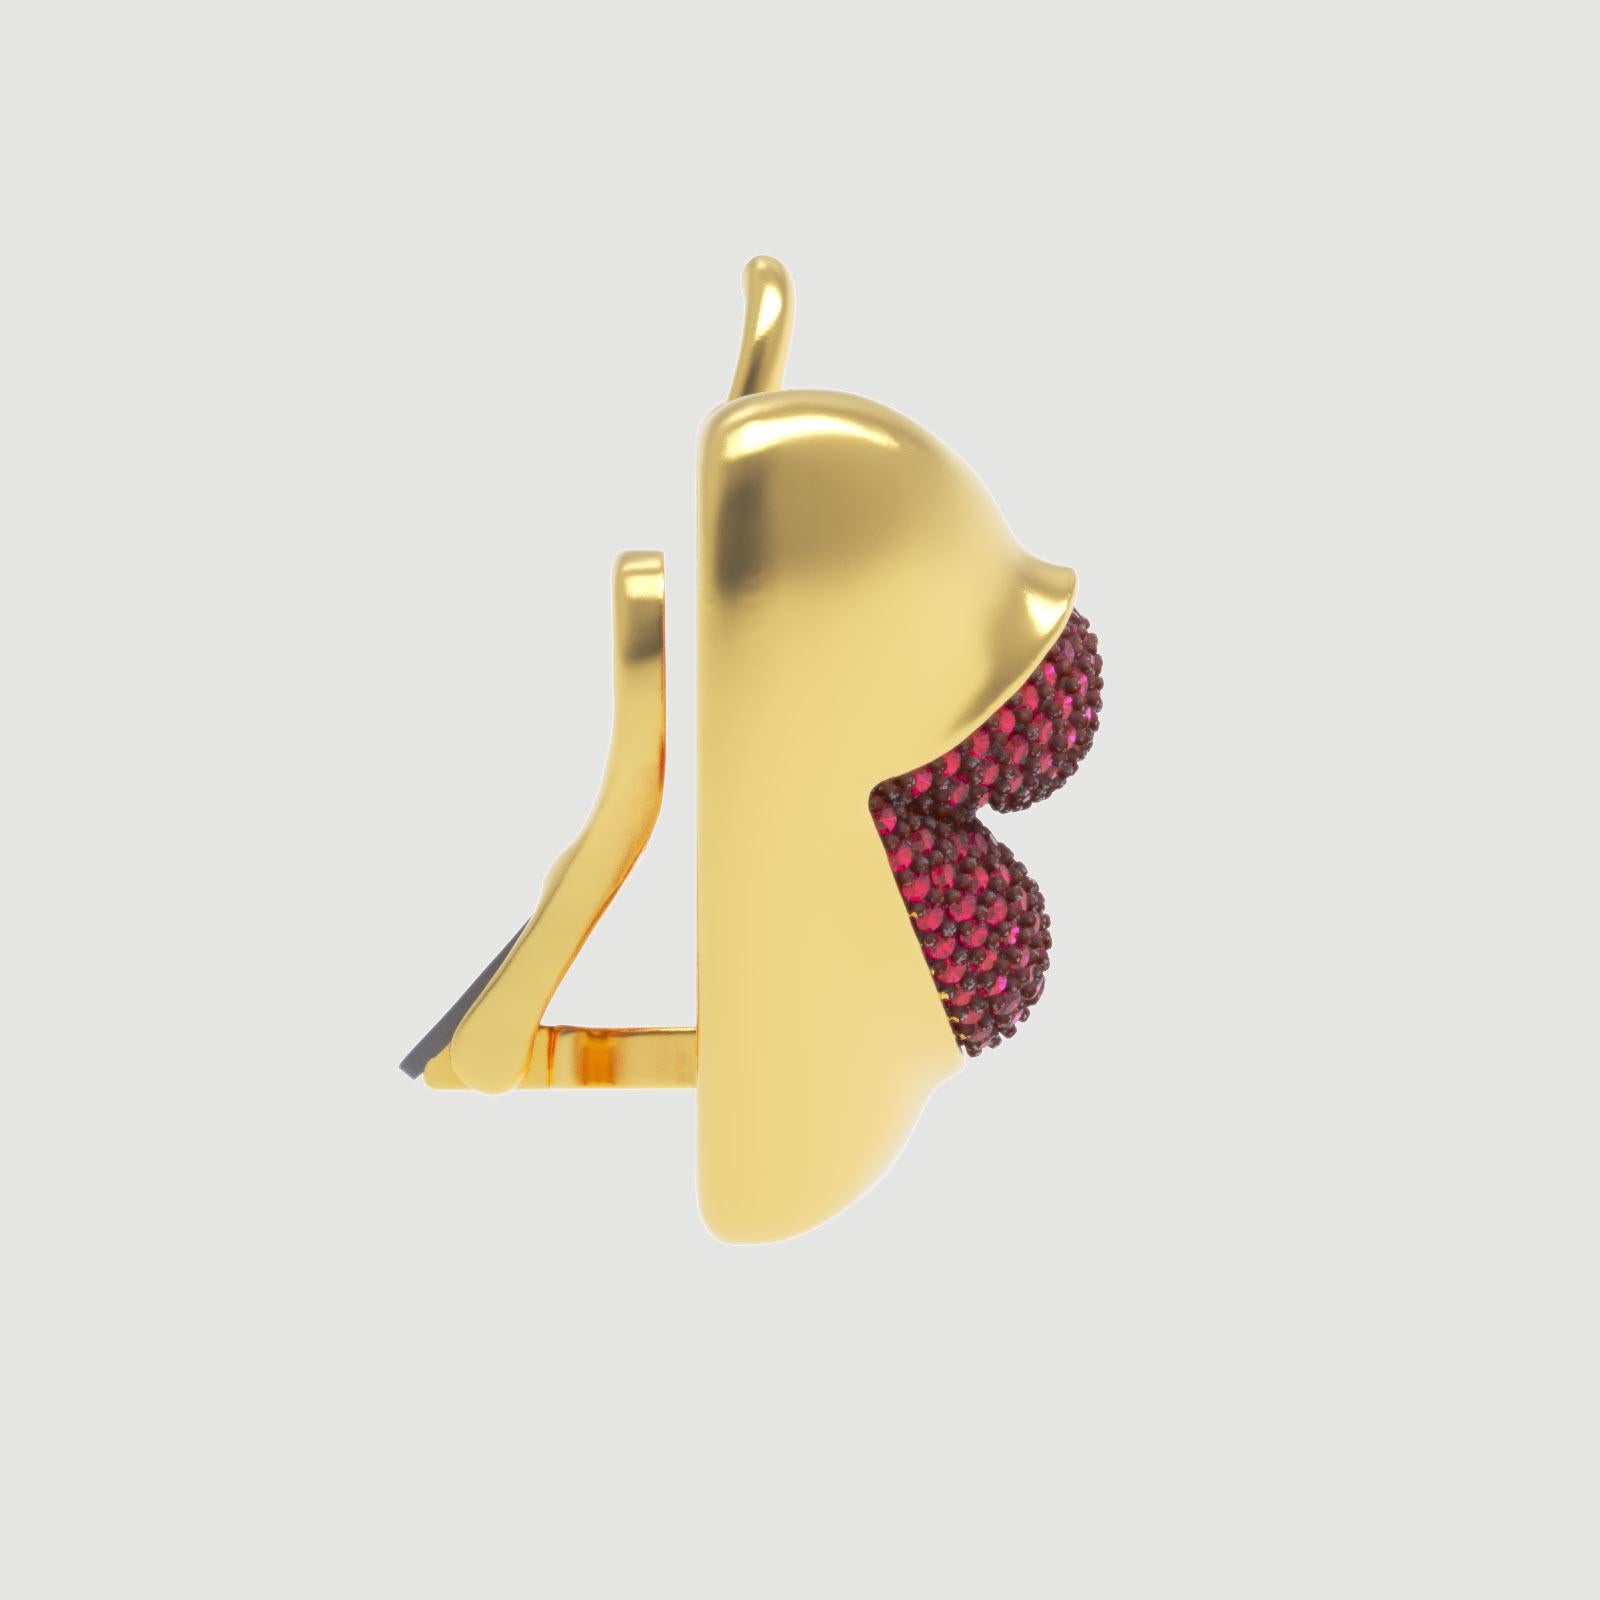 Introducing our stunning Apple Lips Earrings, a masterpiece of chic, feminine and surrealistic design. Inspired by Claude Lalanne's Pomme Bouche sculpture, these earrings are the perfect accessory to elevate any outfit.

Crafted in high-quality gold